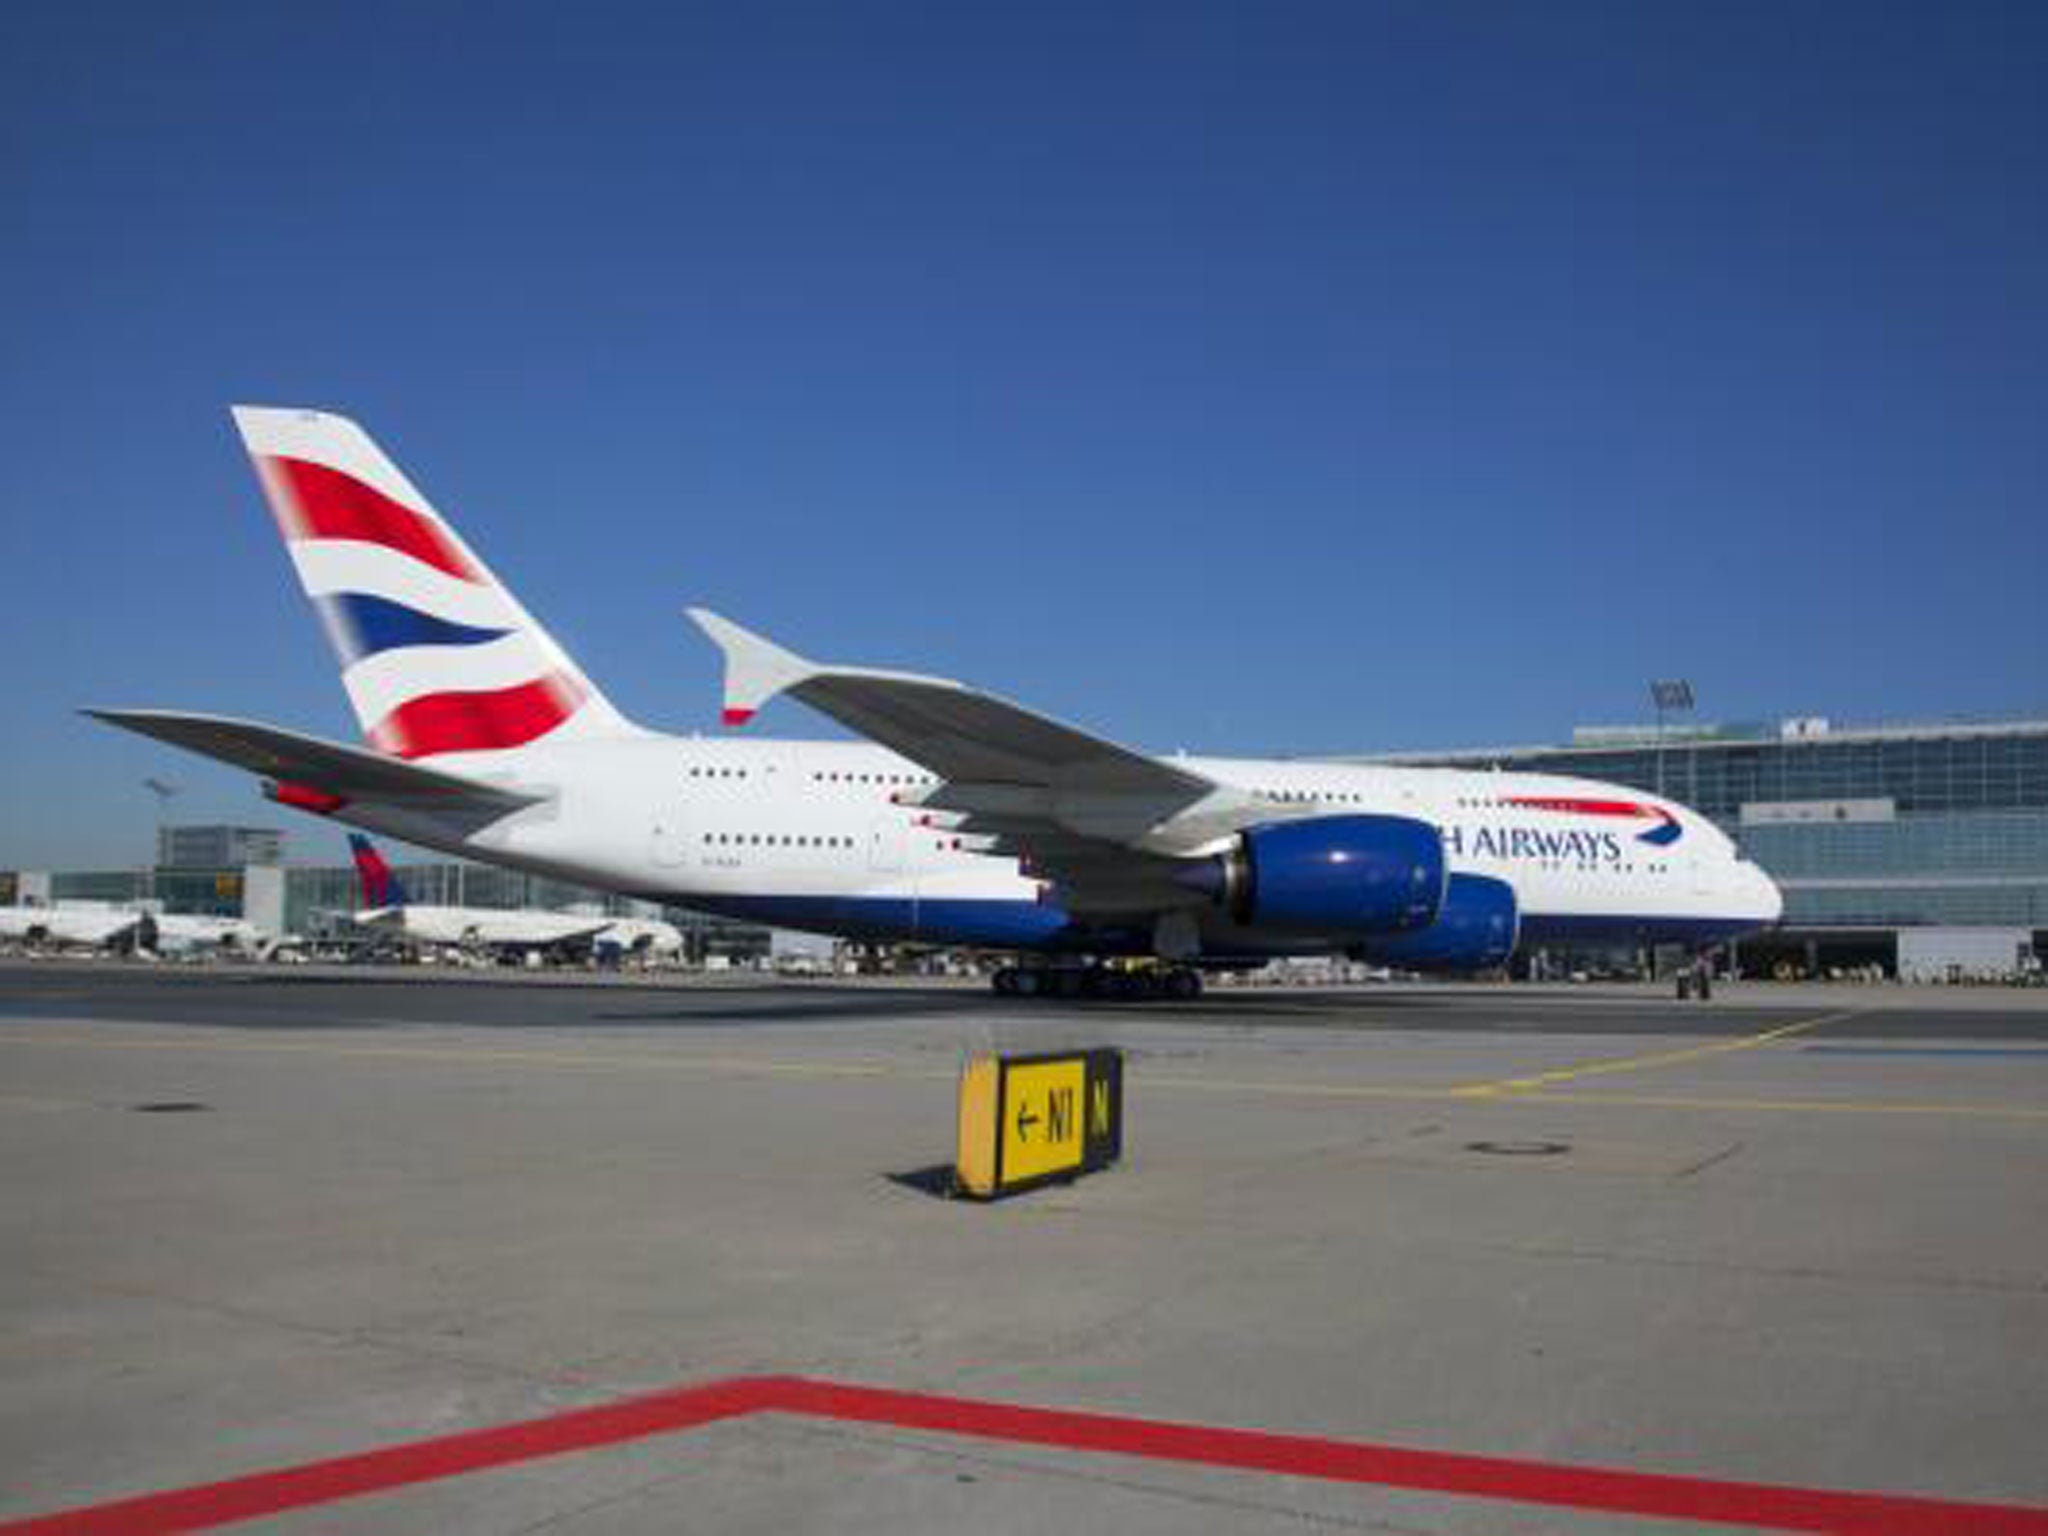 British Airways flew its new A380 aircraft for the first time to Frankfurt as part of a test flight